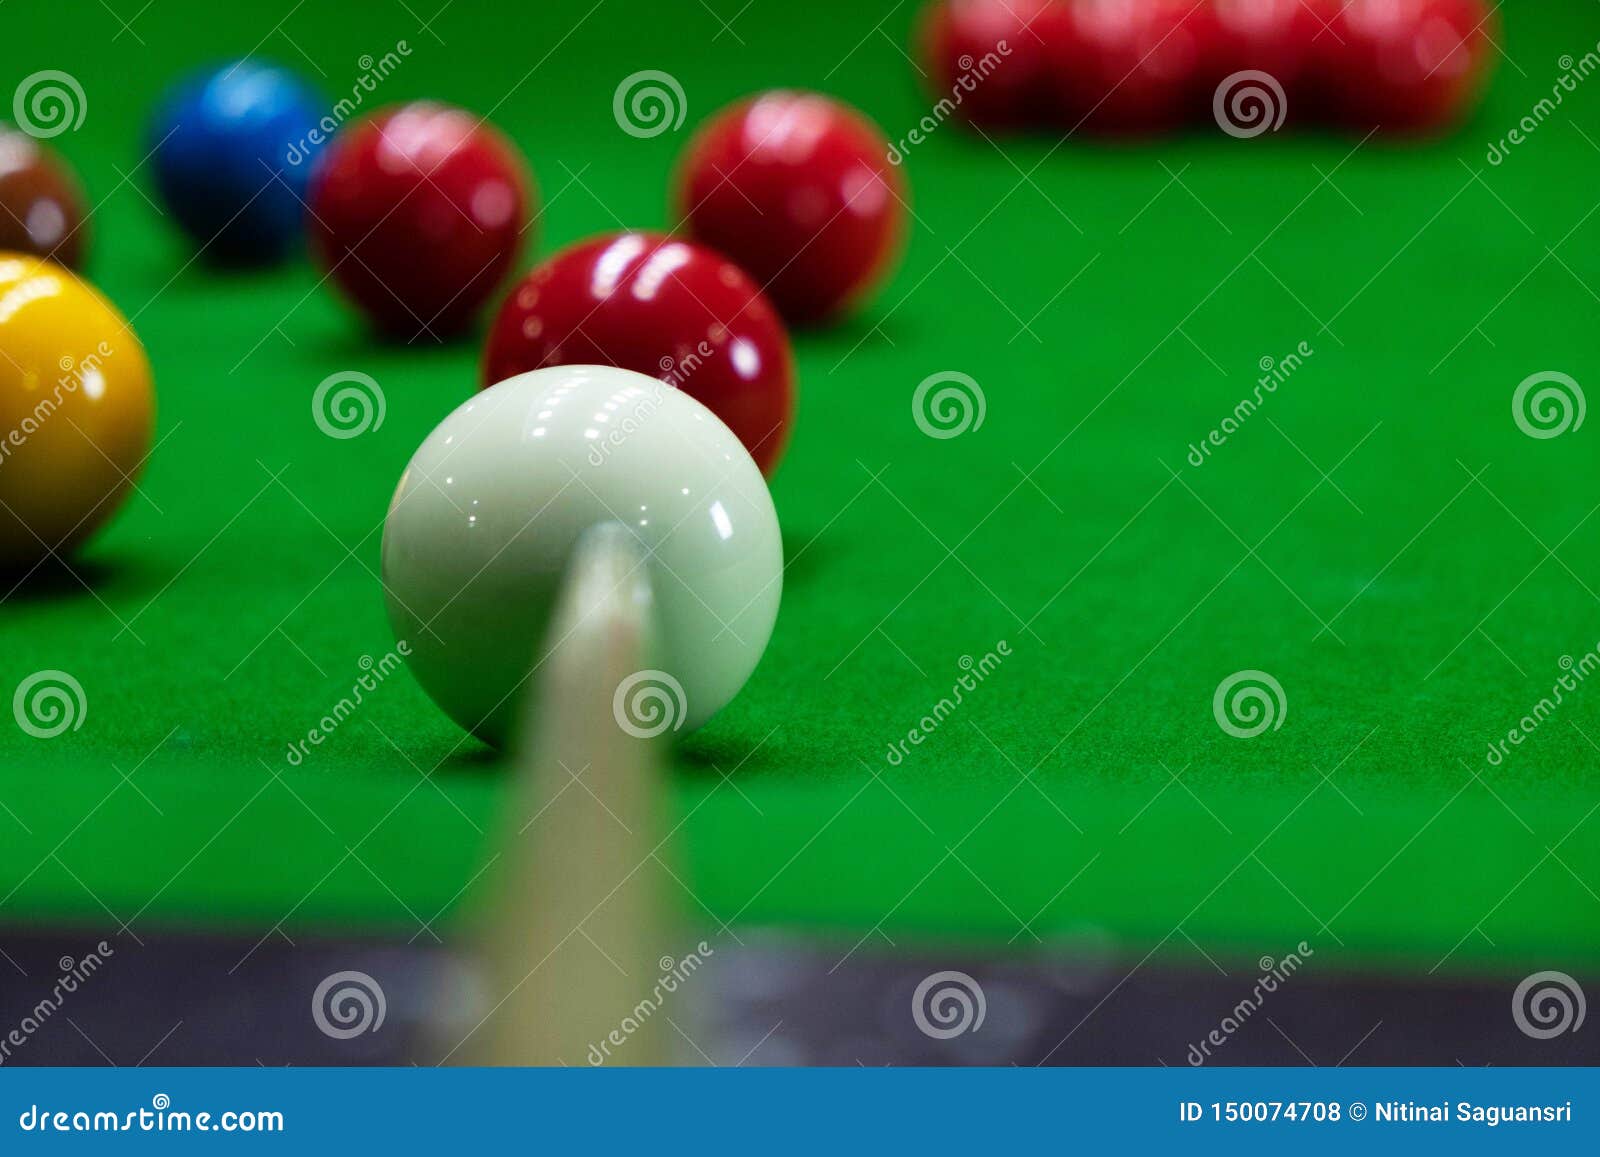 Playing Snooker, Piercing the Red Ball, Black, Aiming the Ball and Pocketing the Hole To Score Points Stock Photo